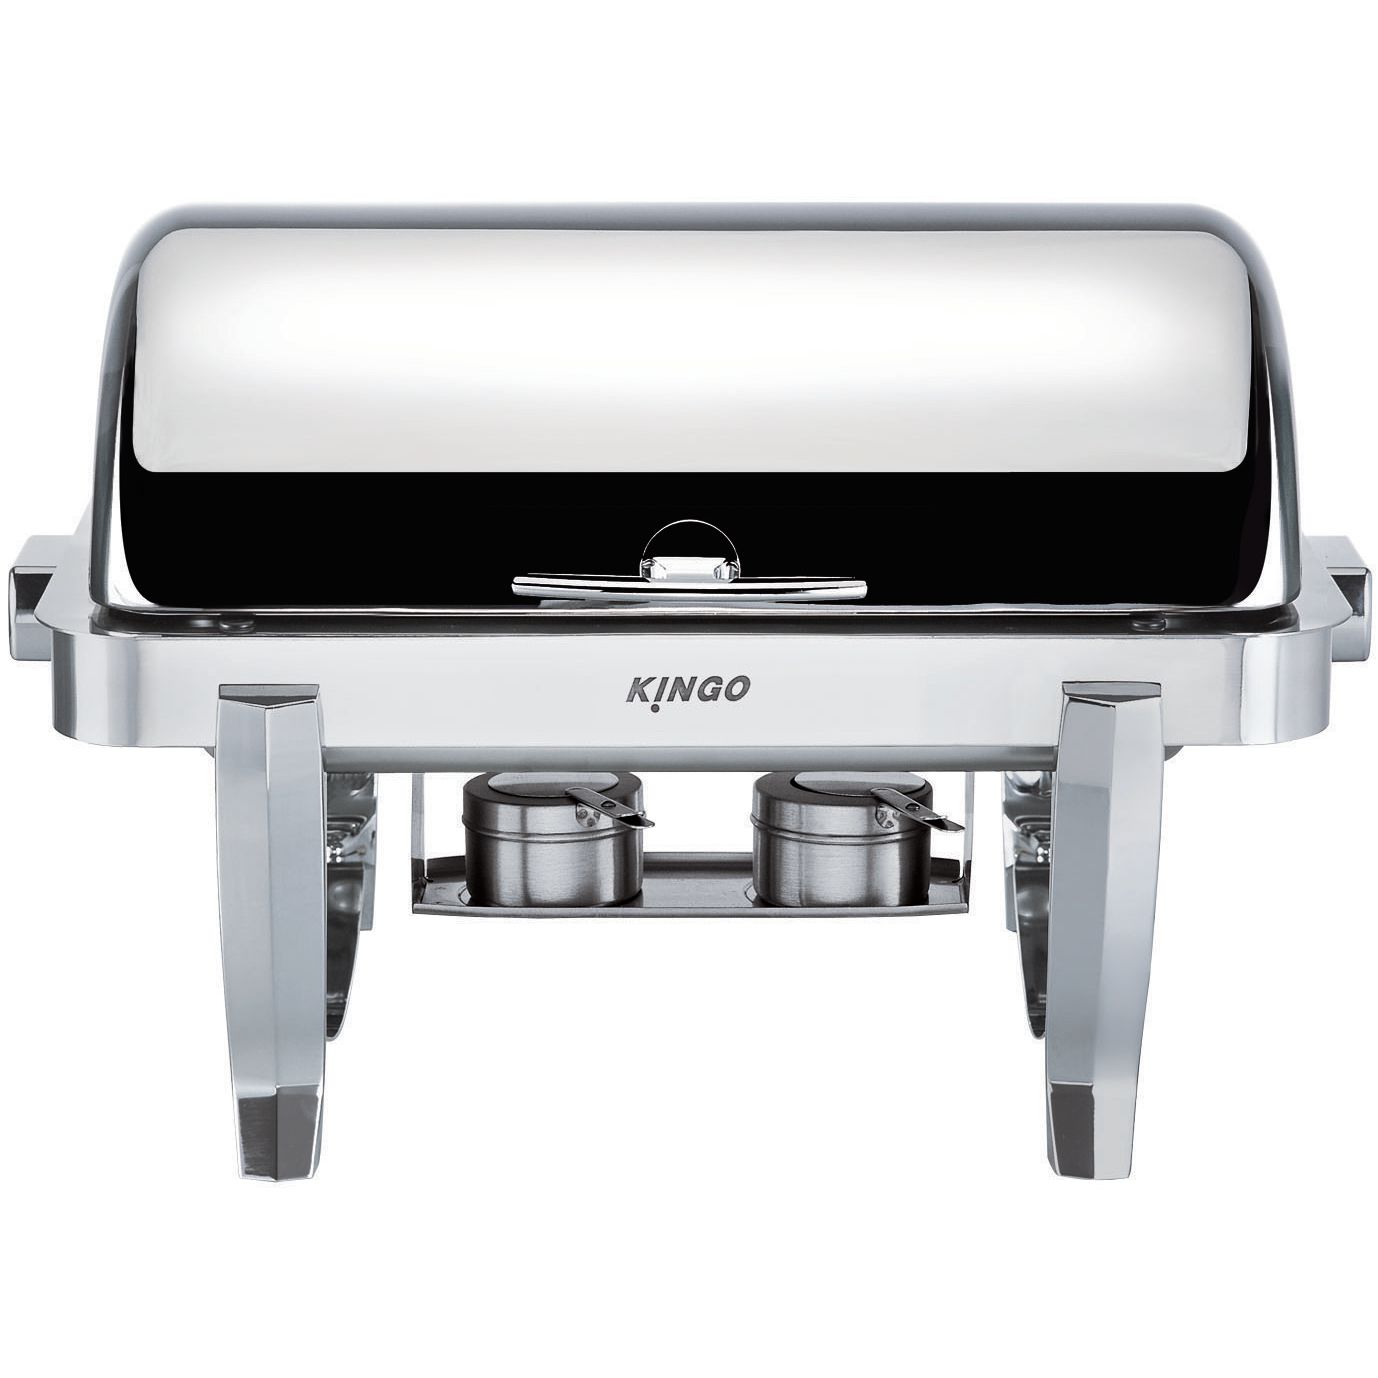 KGB6701G-2 Oblong Chafing Dish with Chrome Legs - Double